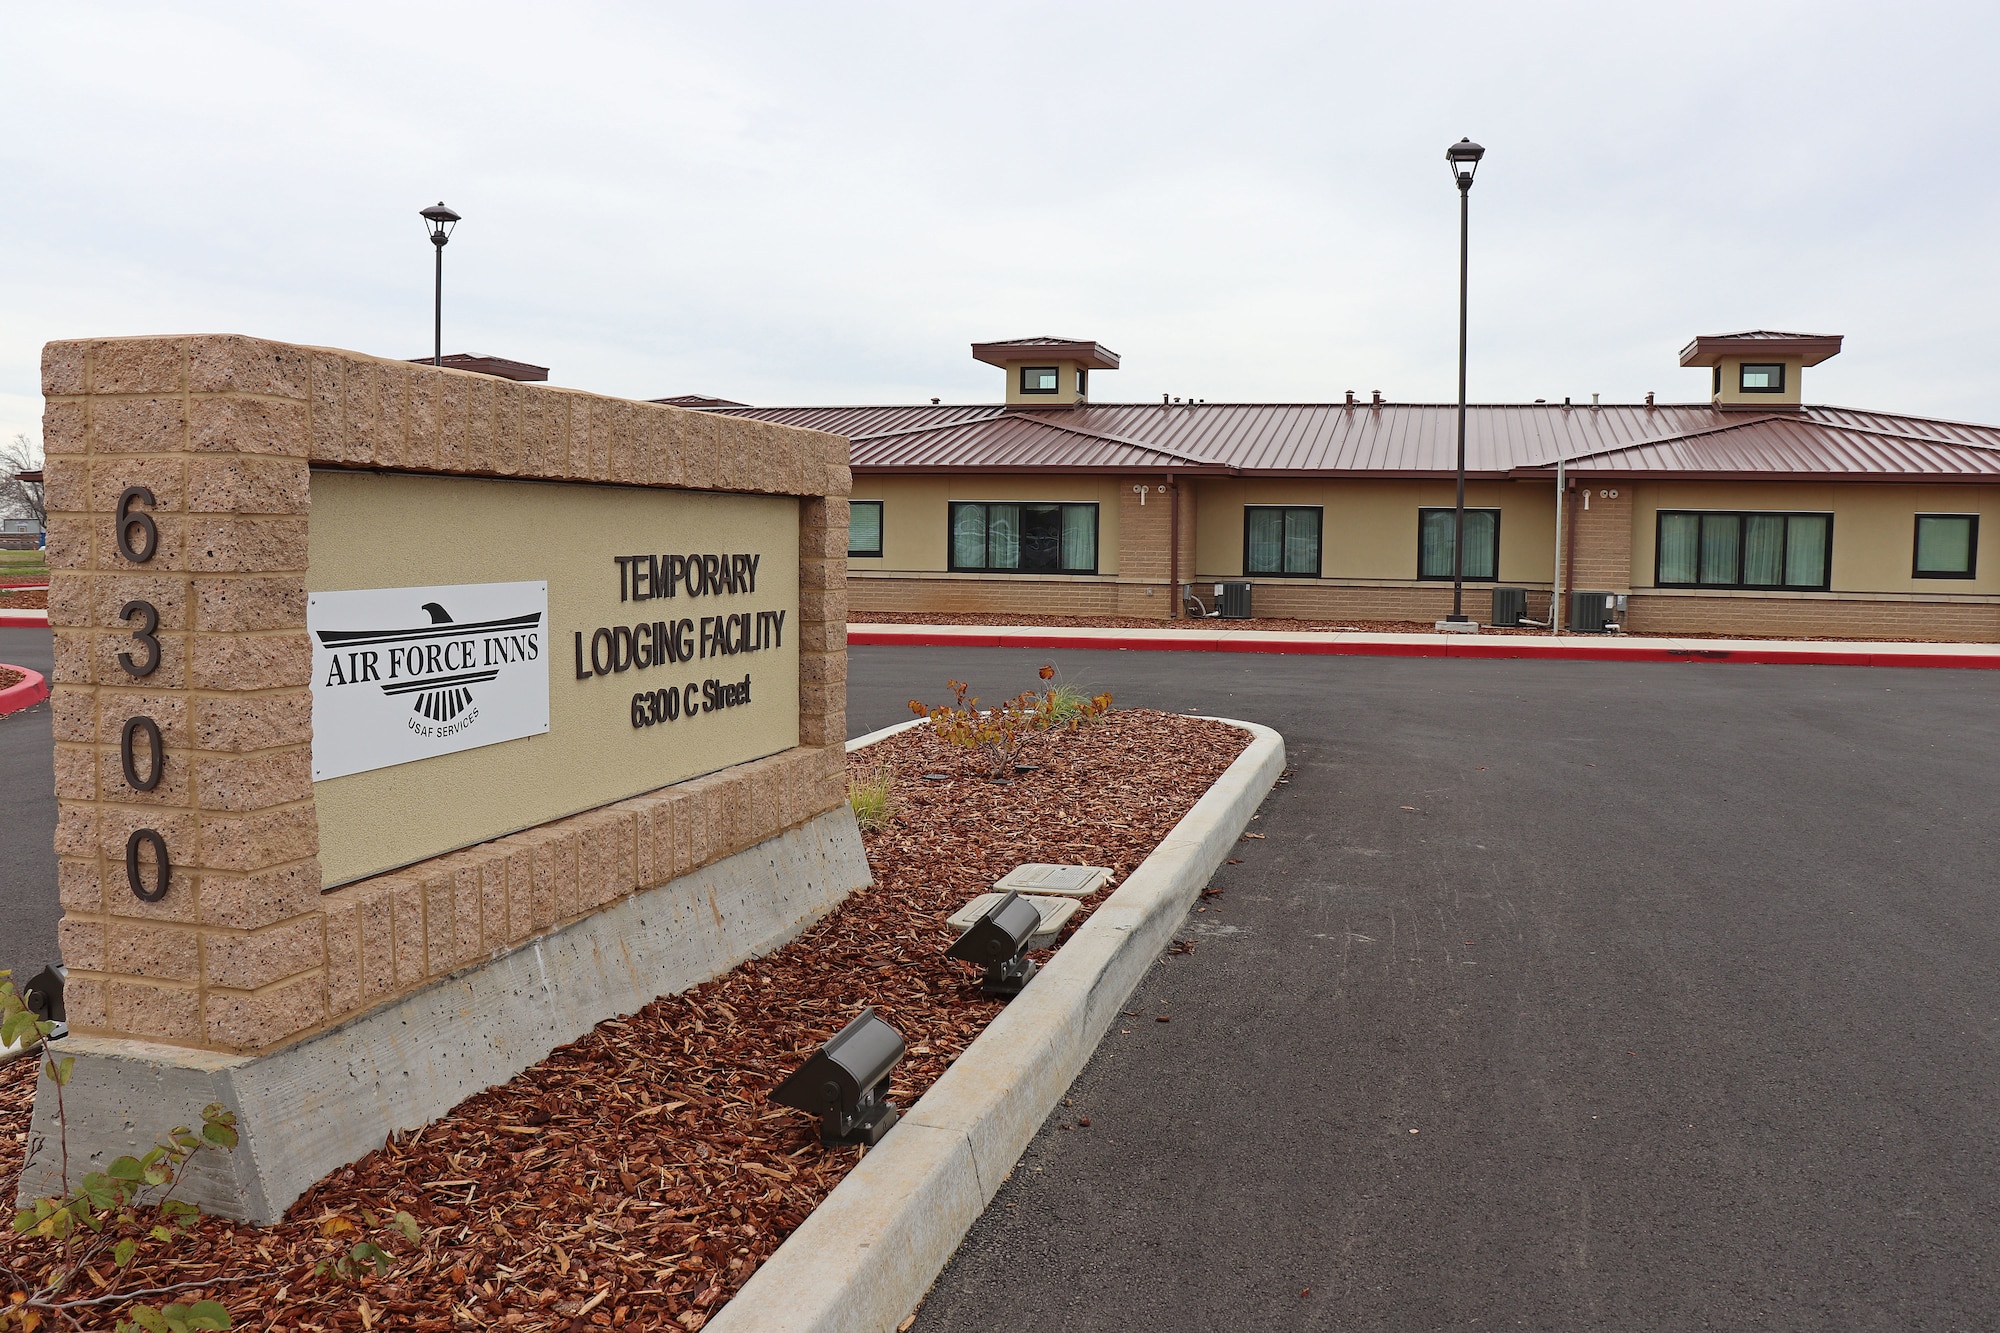 The entrance to the new Beale Air Force Base, California, temporary lodging facility. (U.S. Air Force photo by Erica L. Fowler)